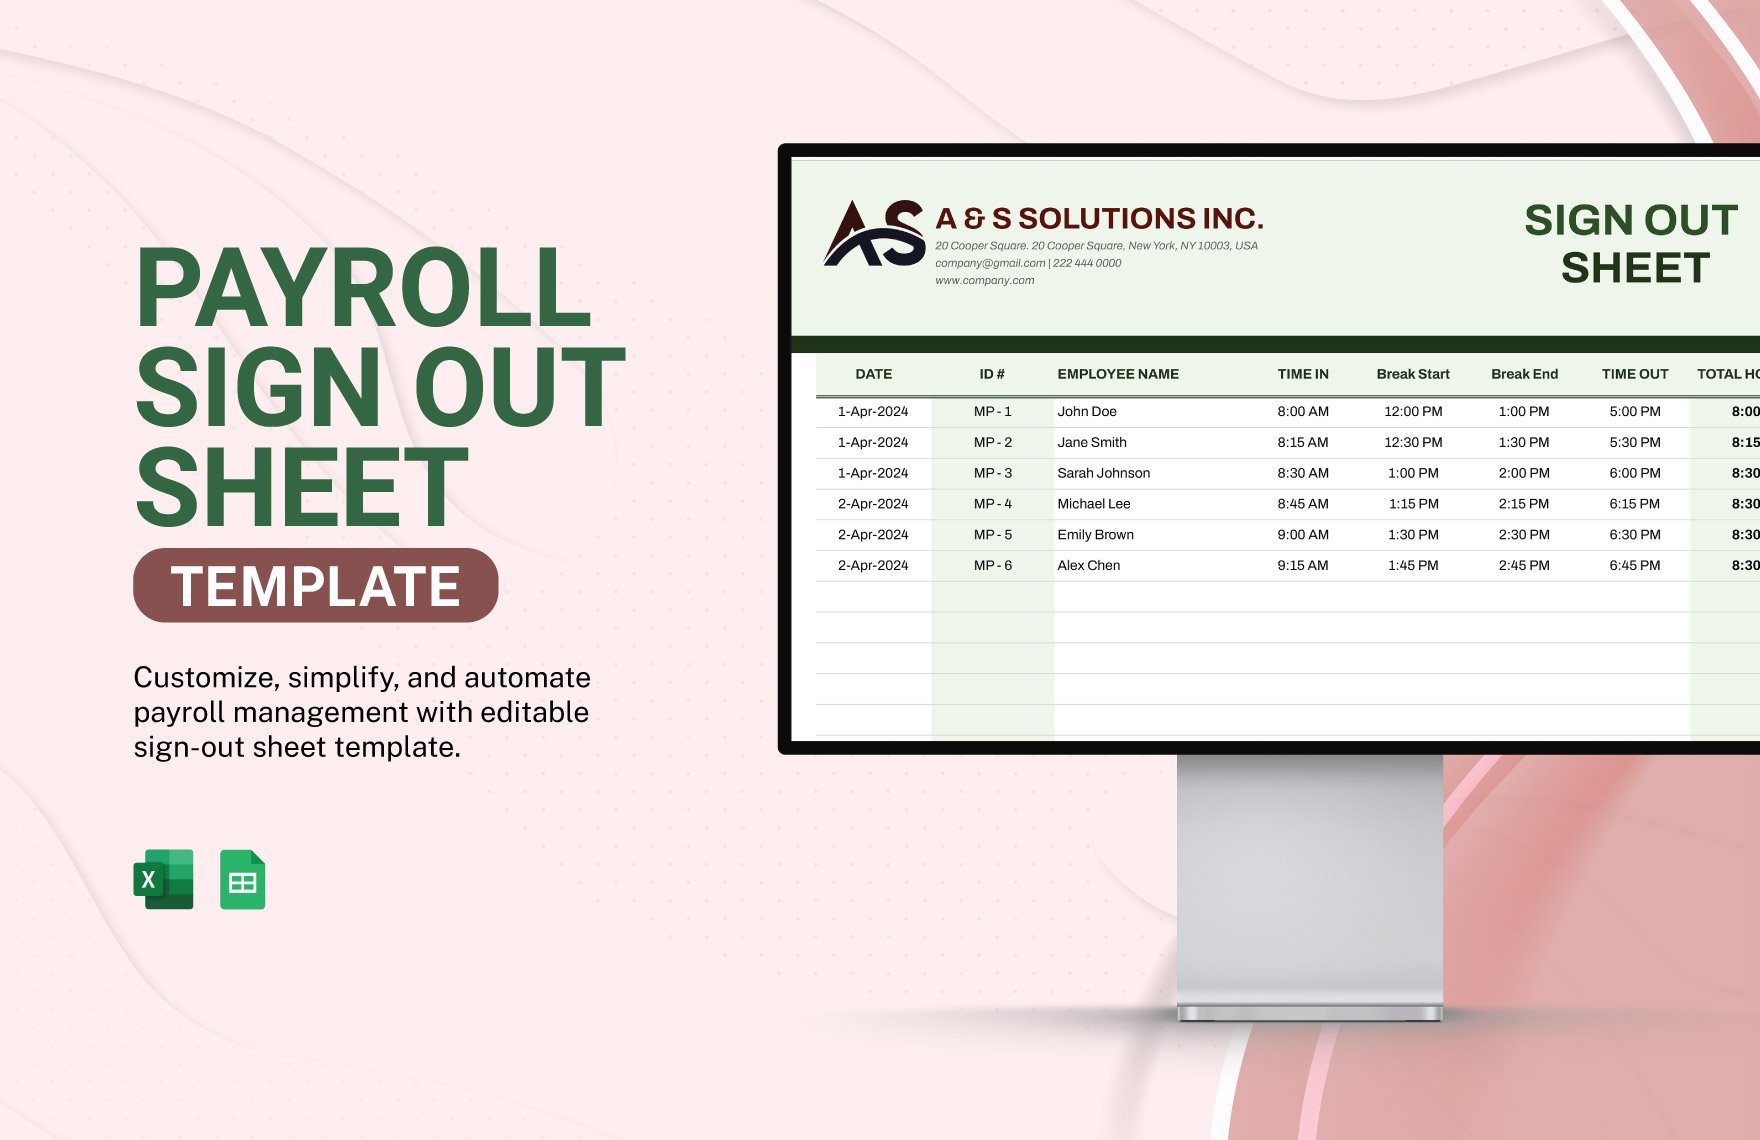 Payroll Sign Out Sheet Template in Excel, Google Sheets